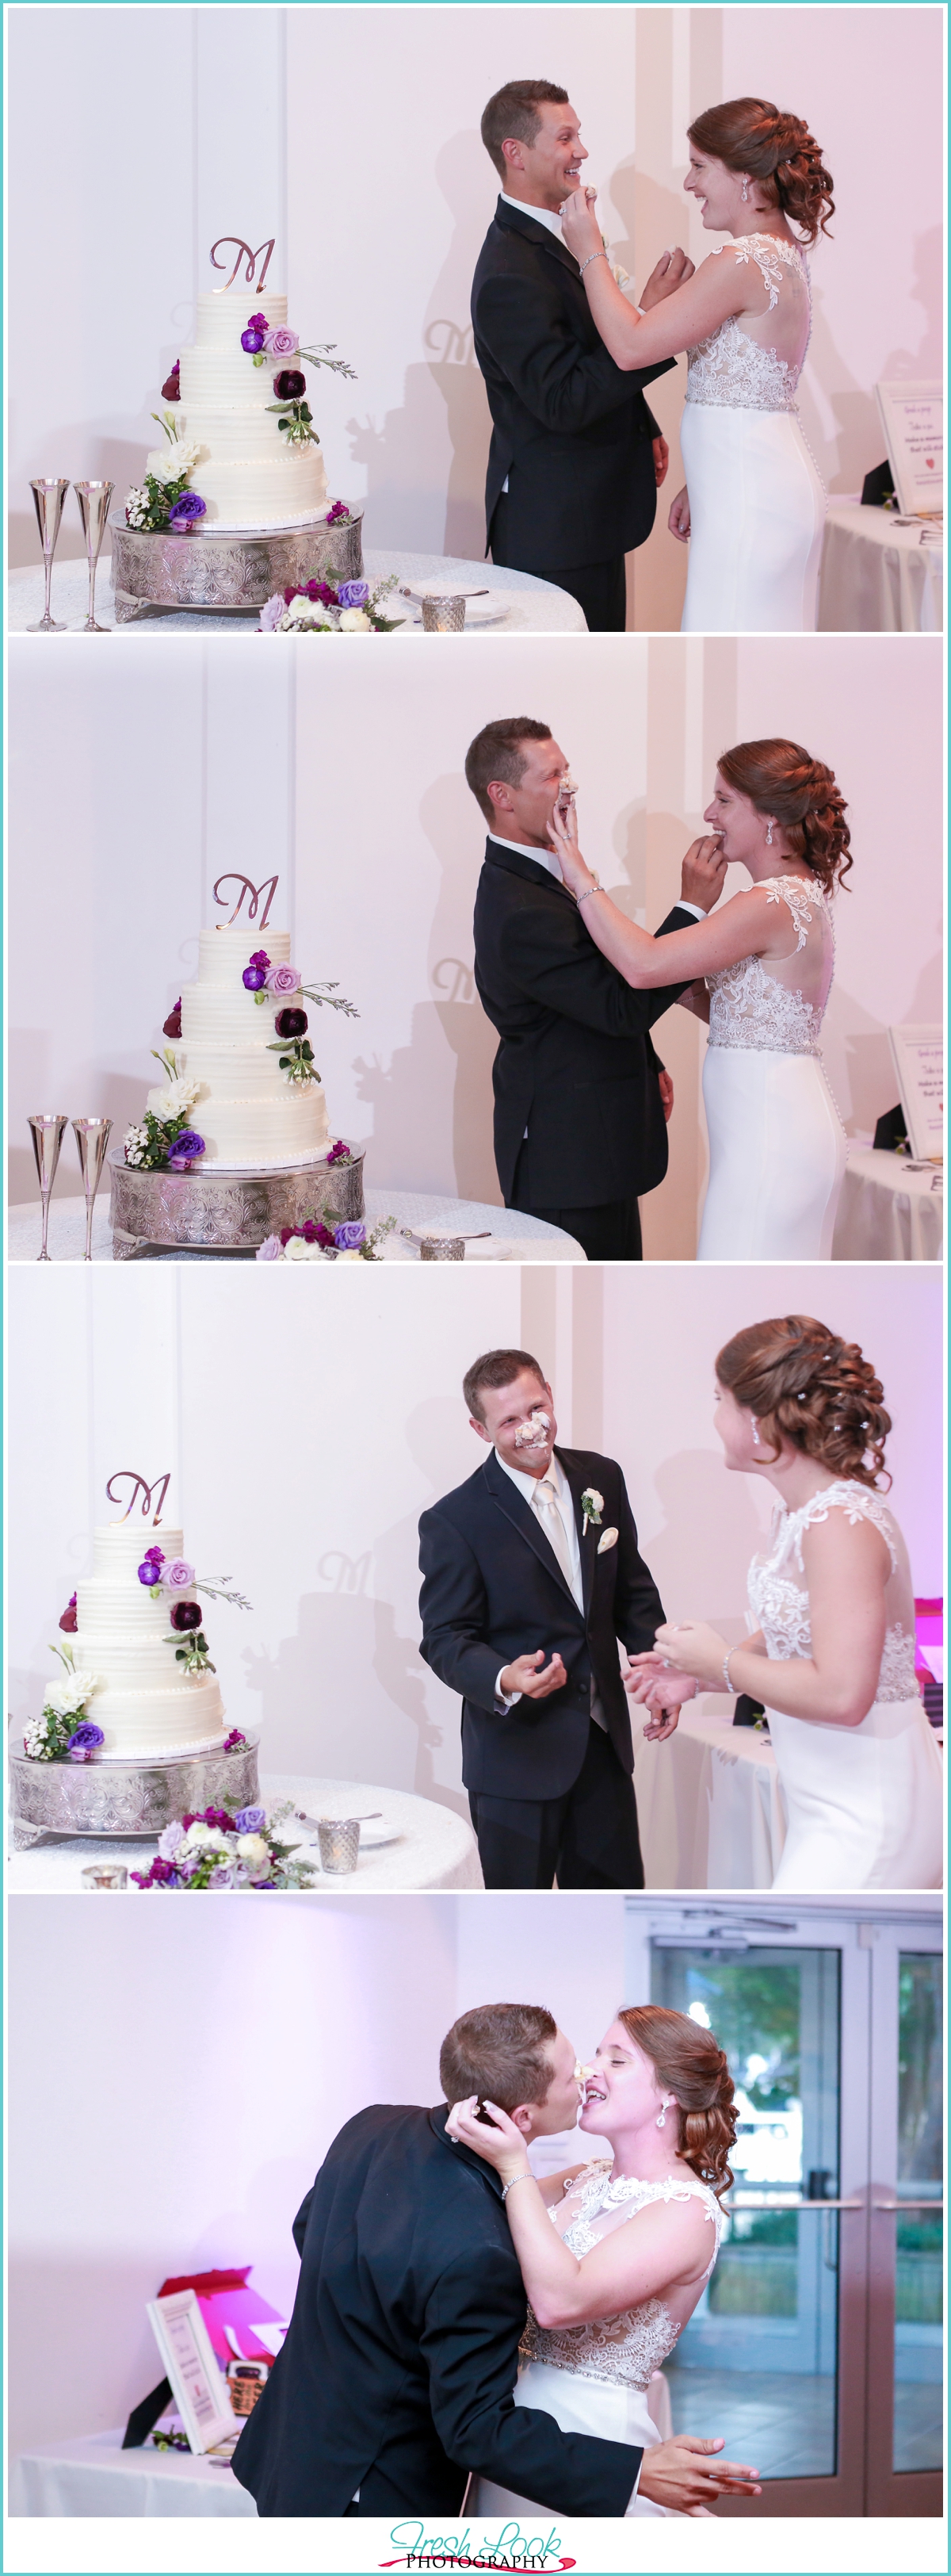 smashing cake in the grooms face